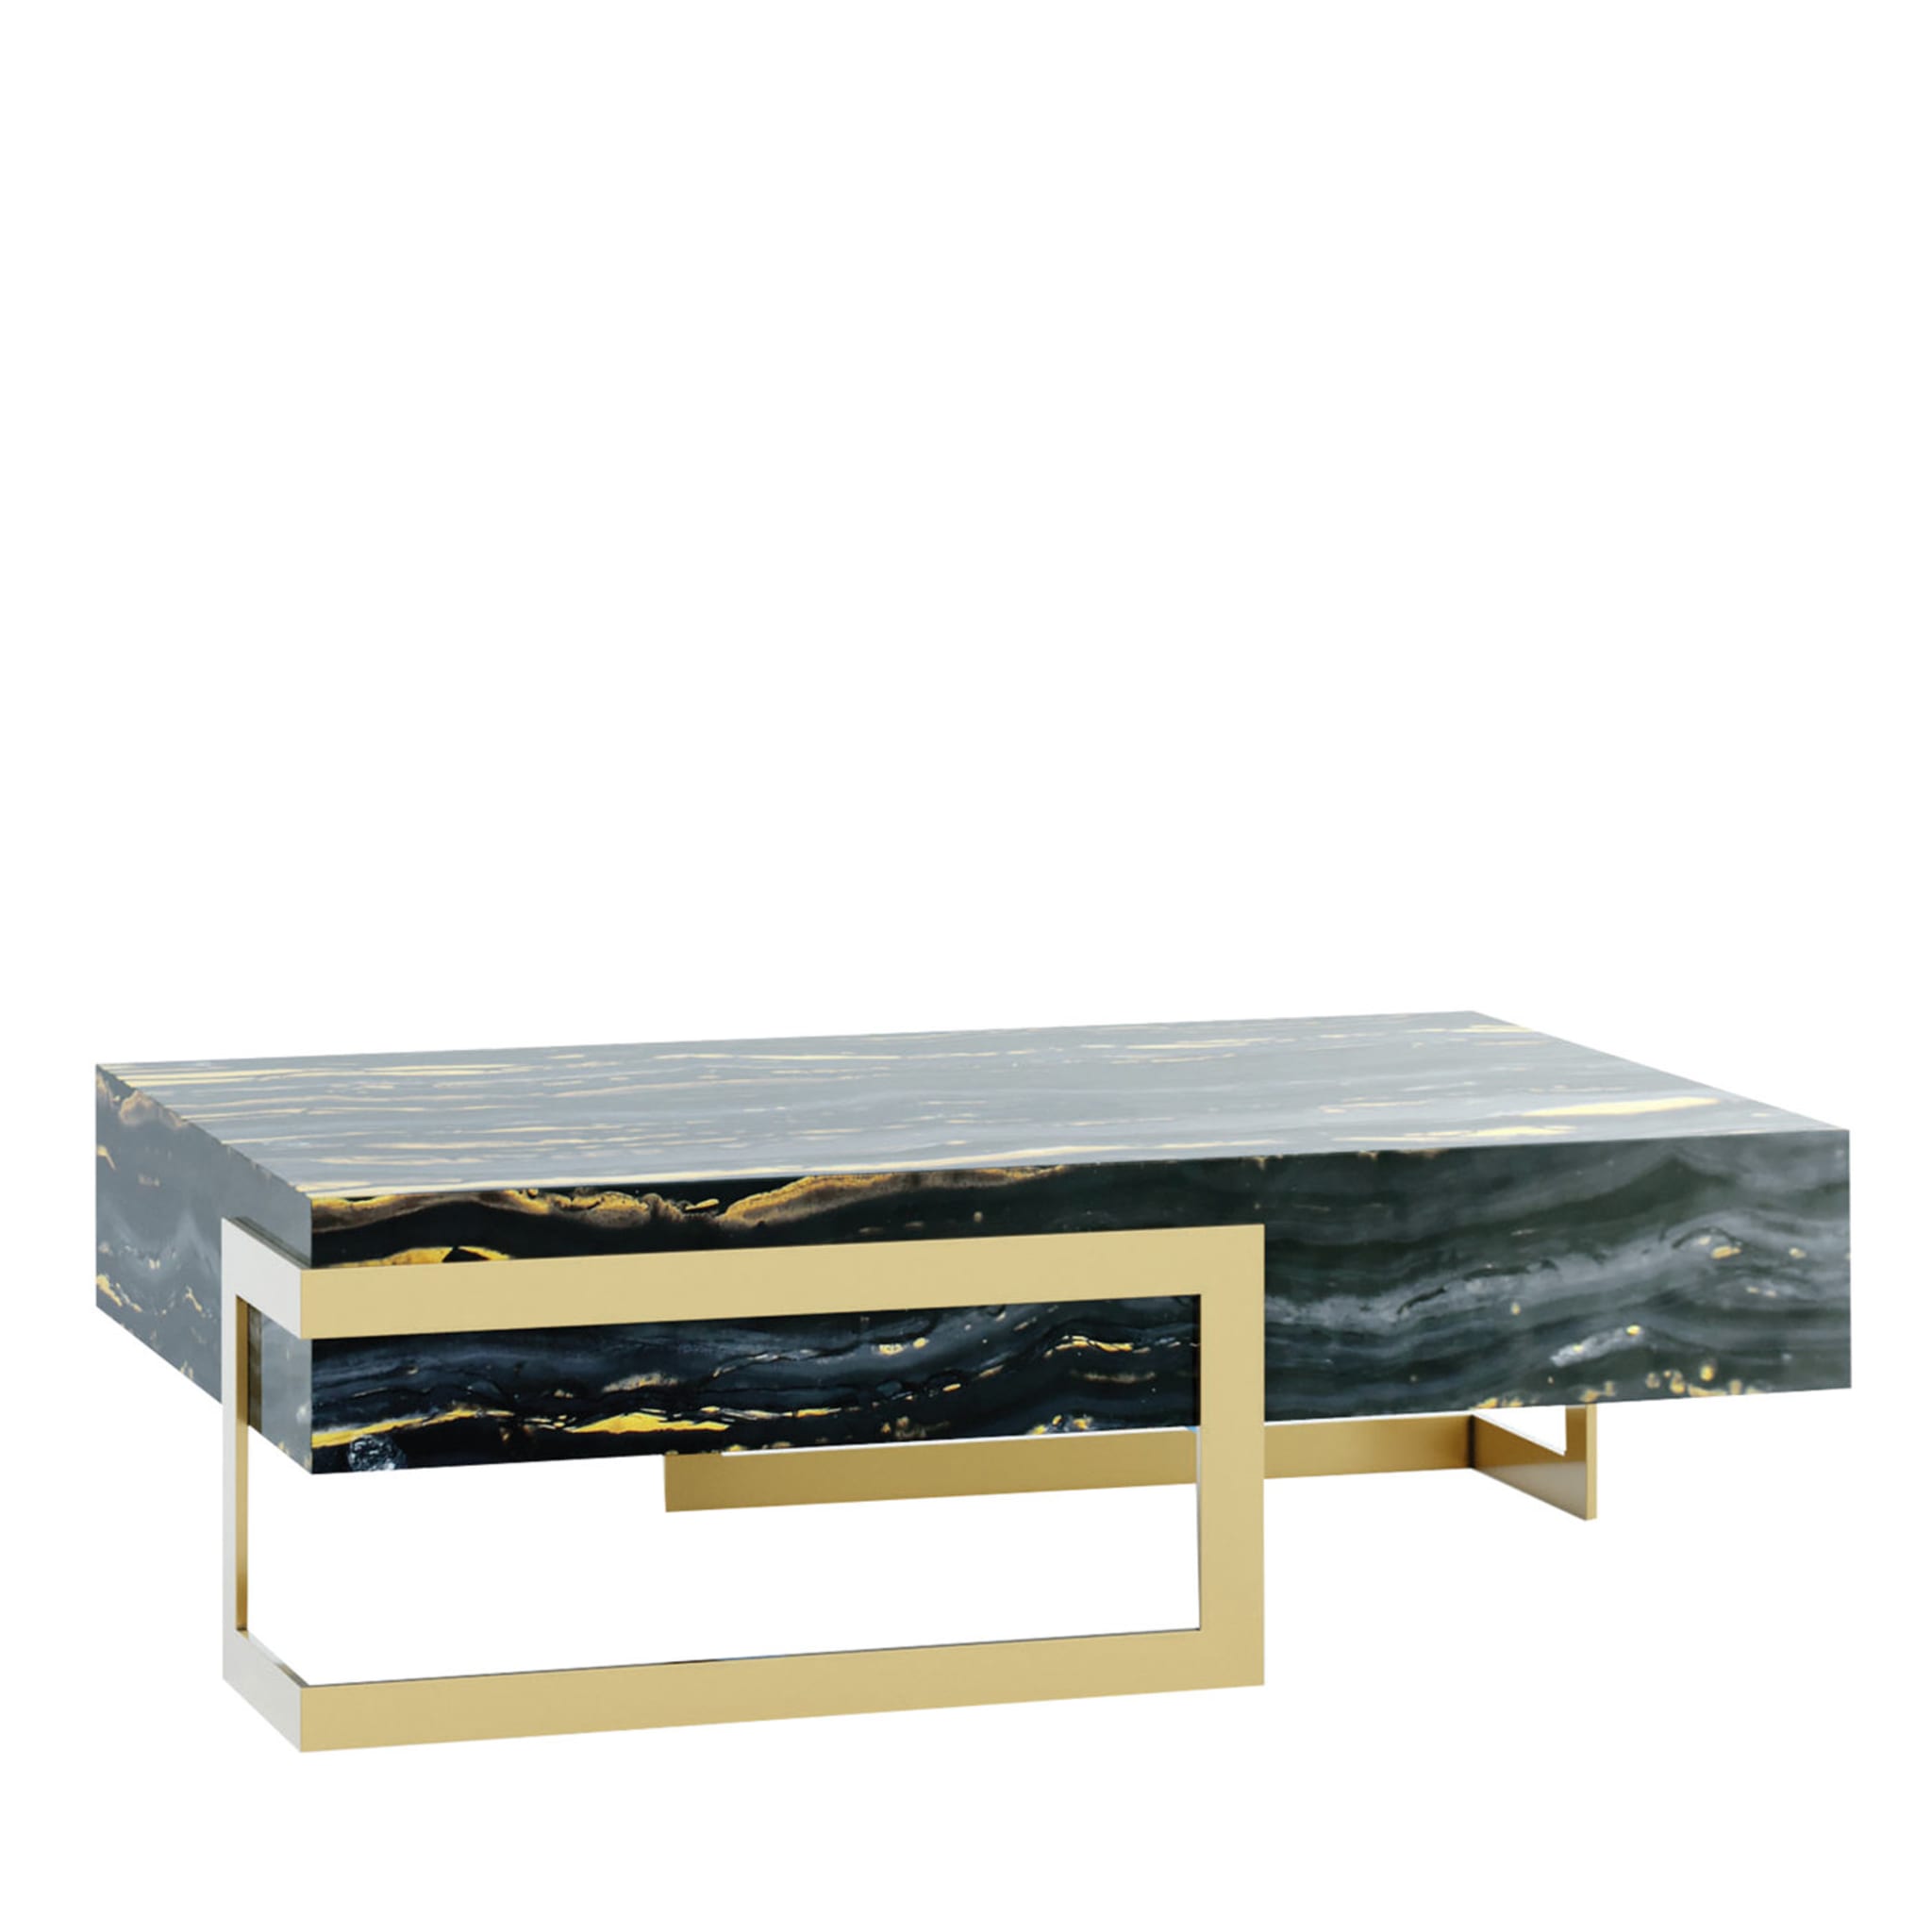 Holbrook Coffee Table by Giannella Ventura - Main view